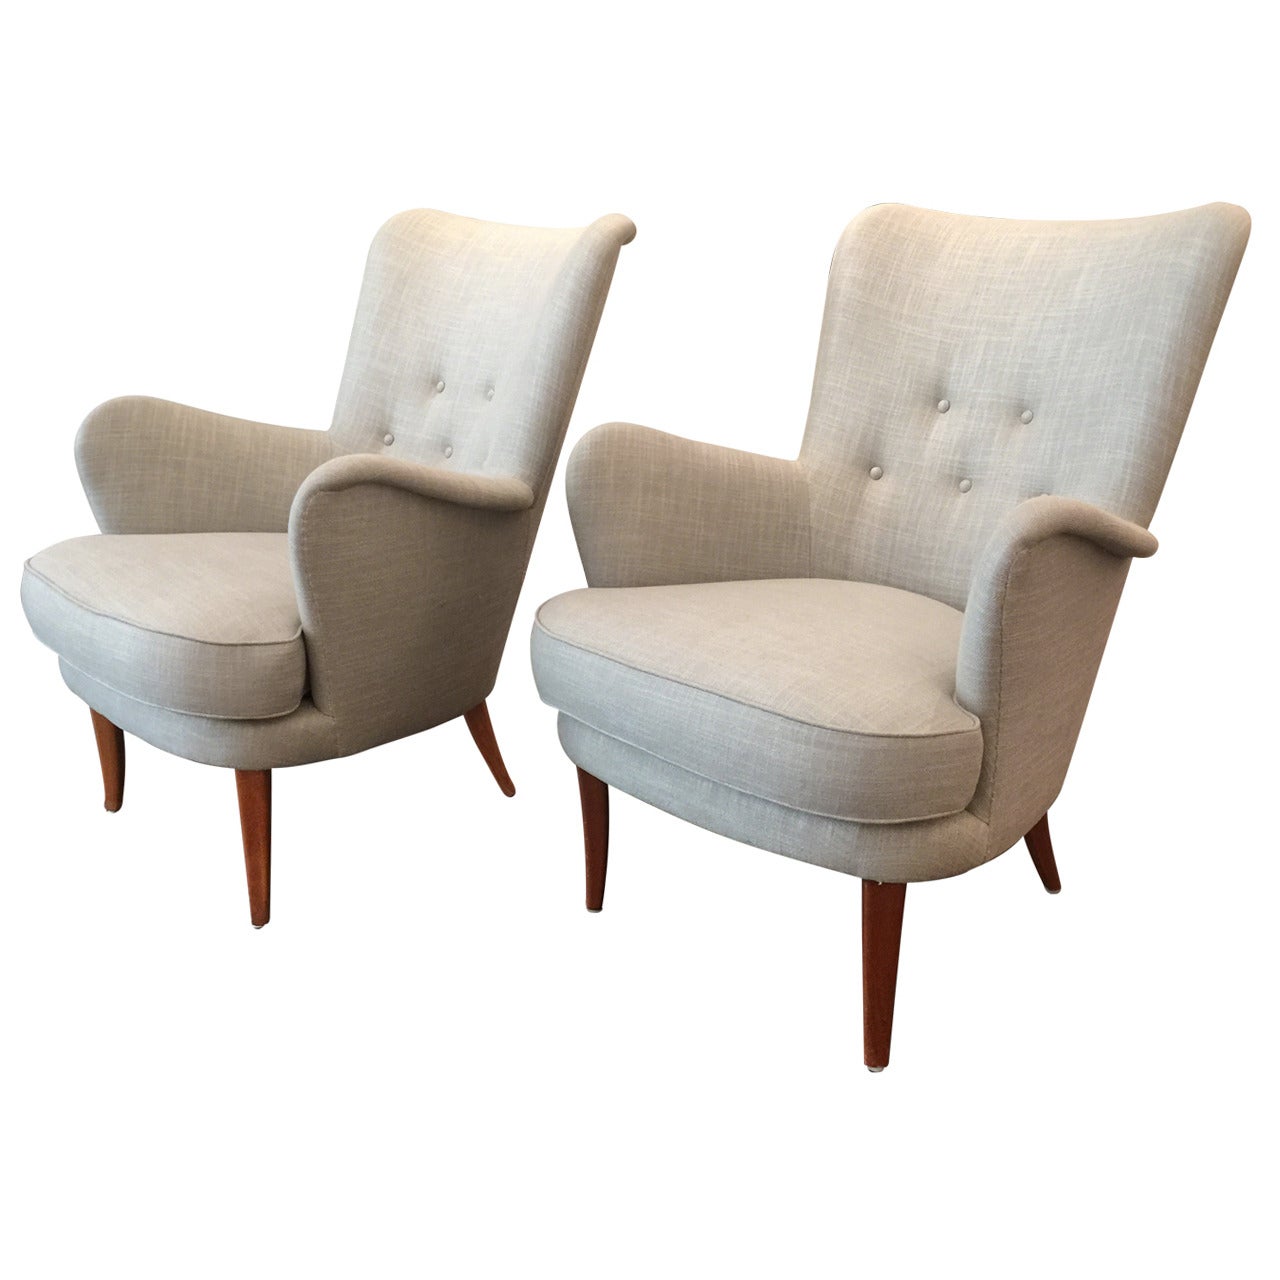 Pair of Upholstered Armchairs by Carl Malmsten